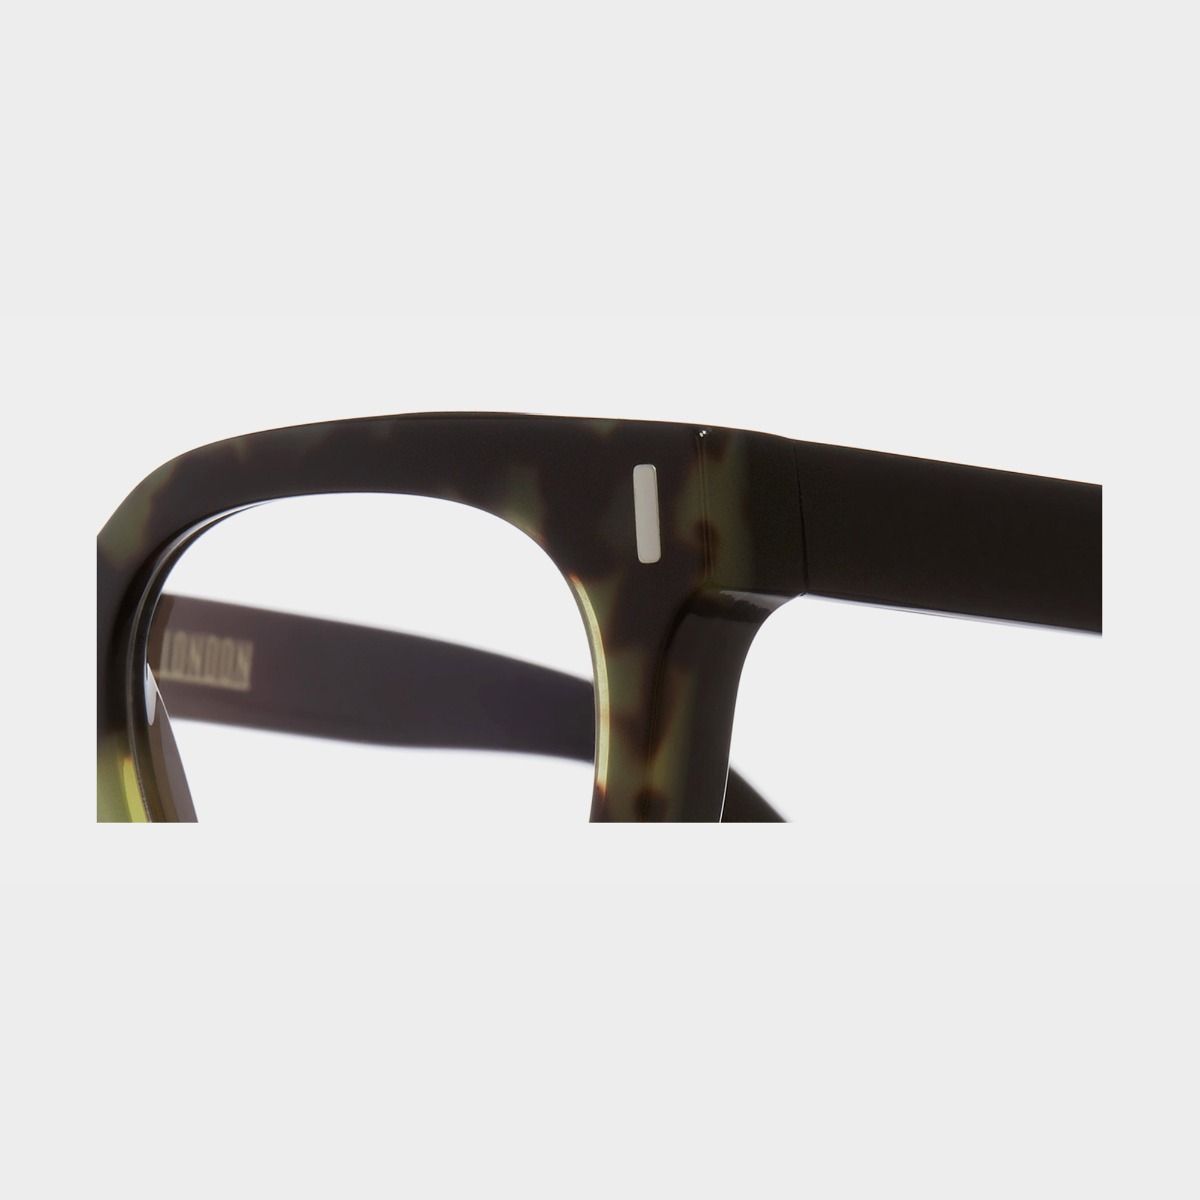 Cutler and Gross, 1304 Optical Round Glasses - Green Camo on Black